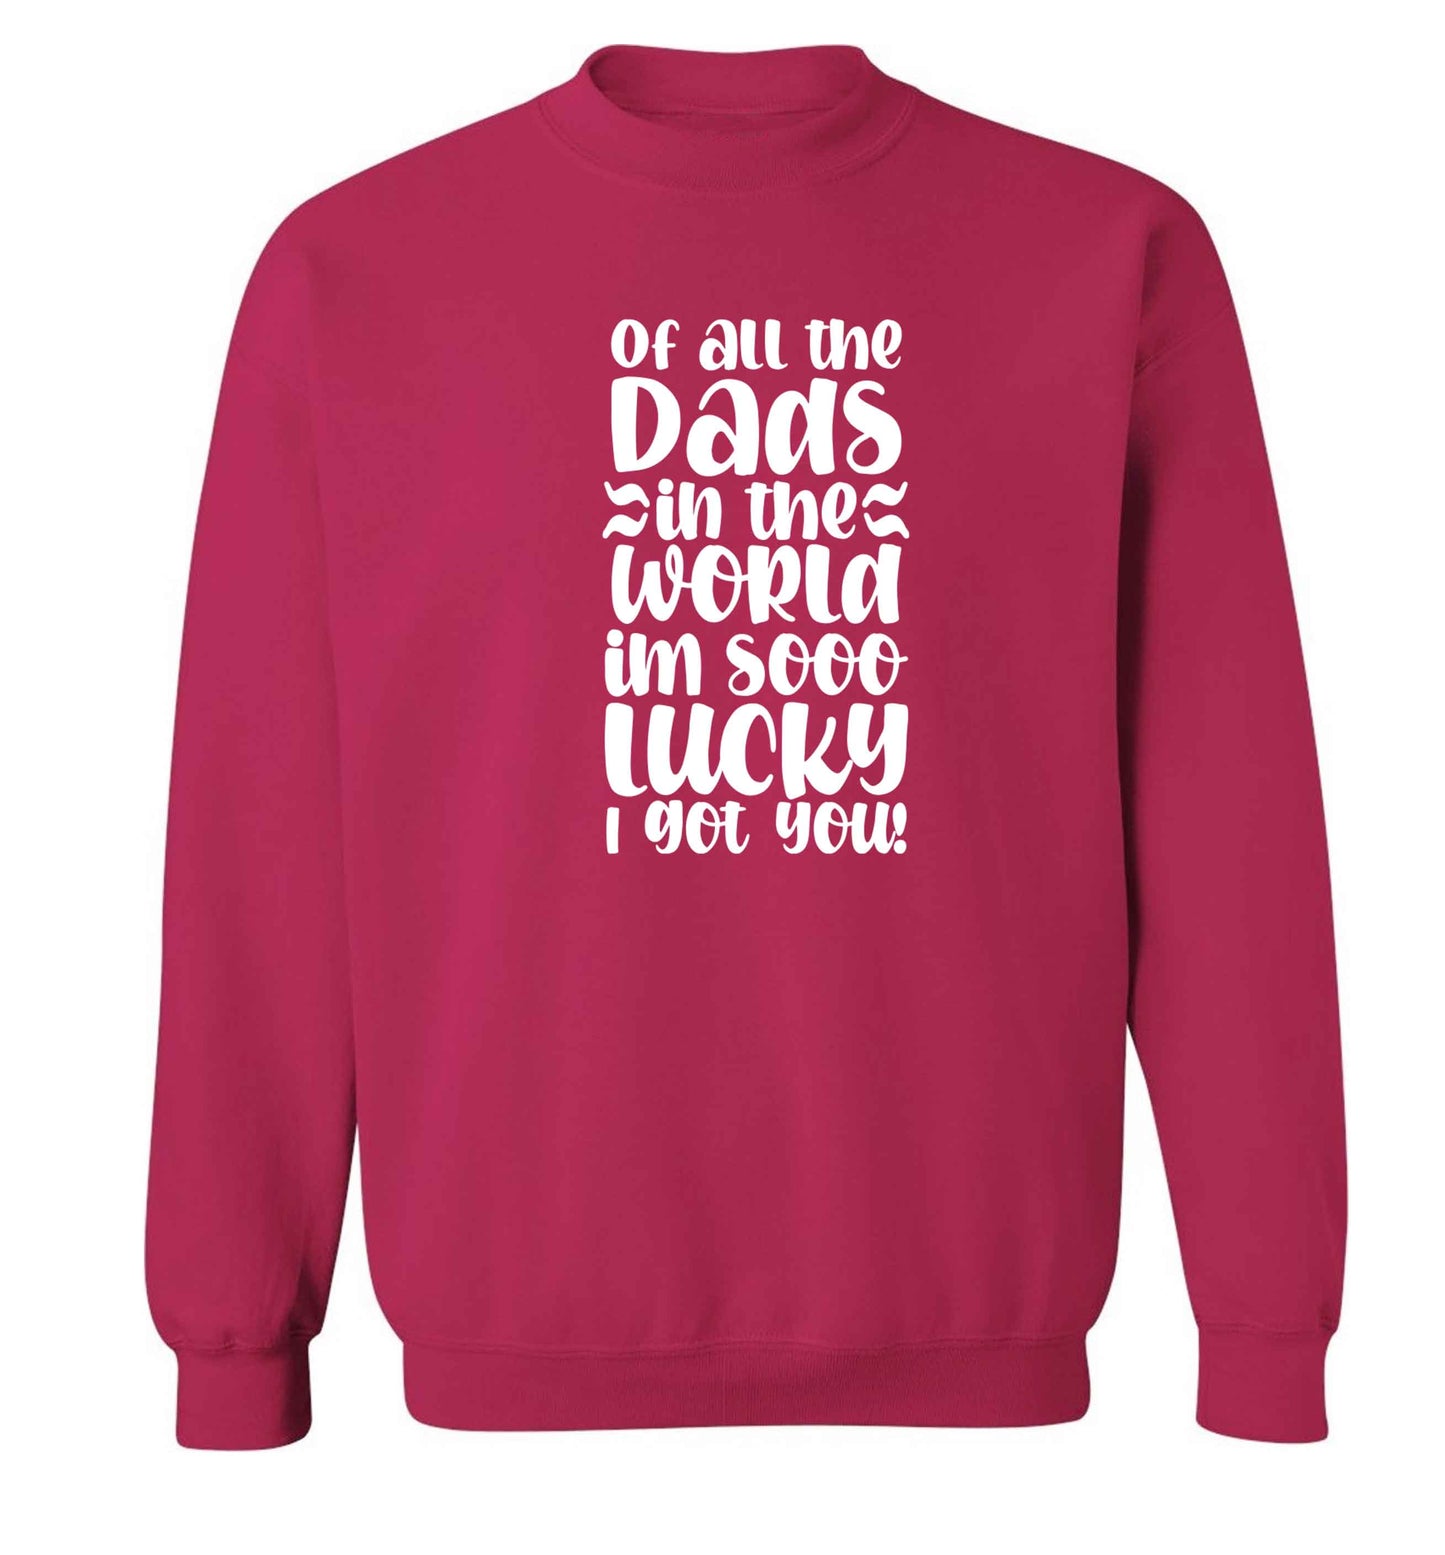 Of all the Dads in the world I'm so lucky I got you adult's unisex pink sweater 2XL